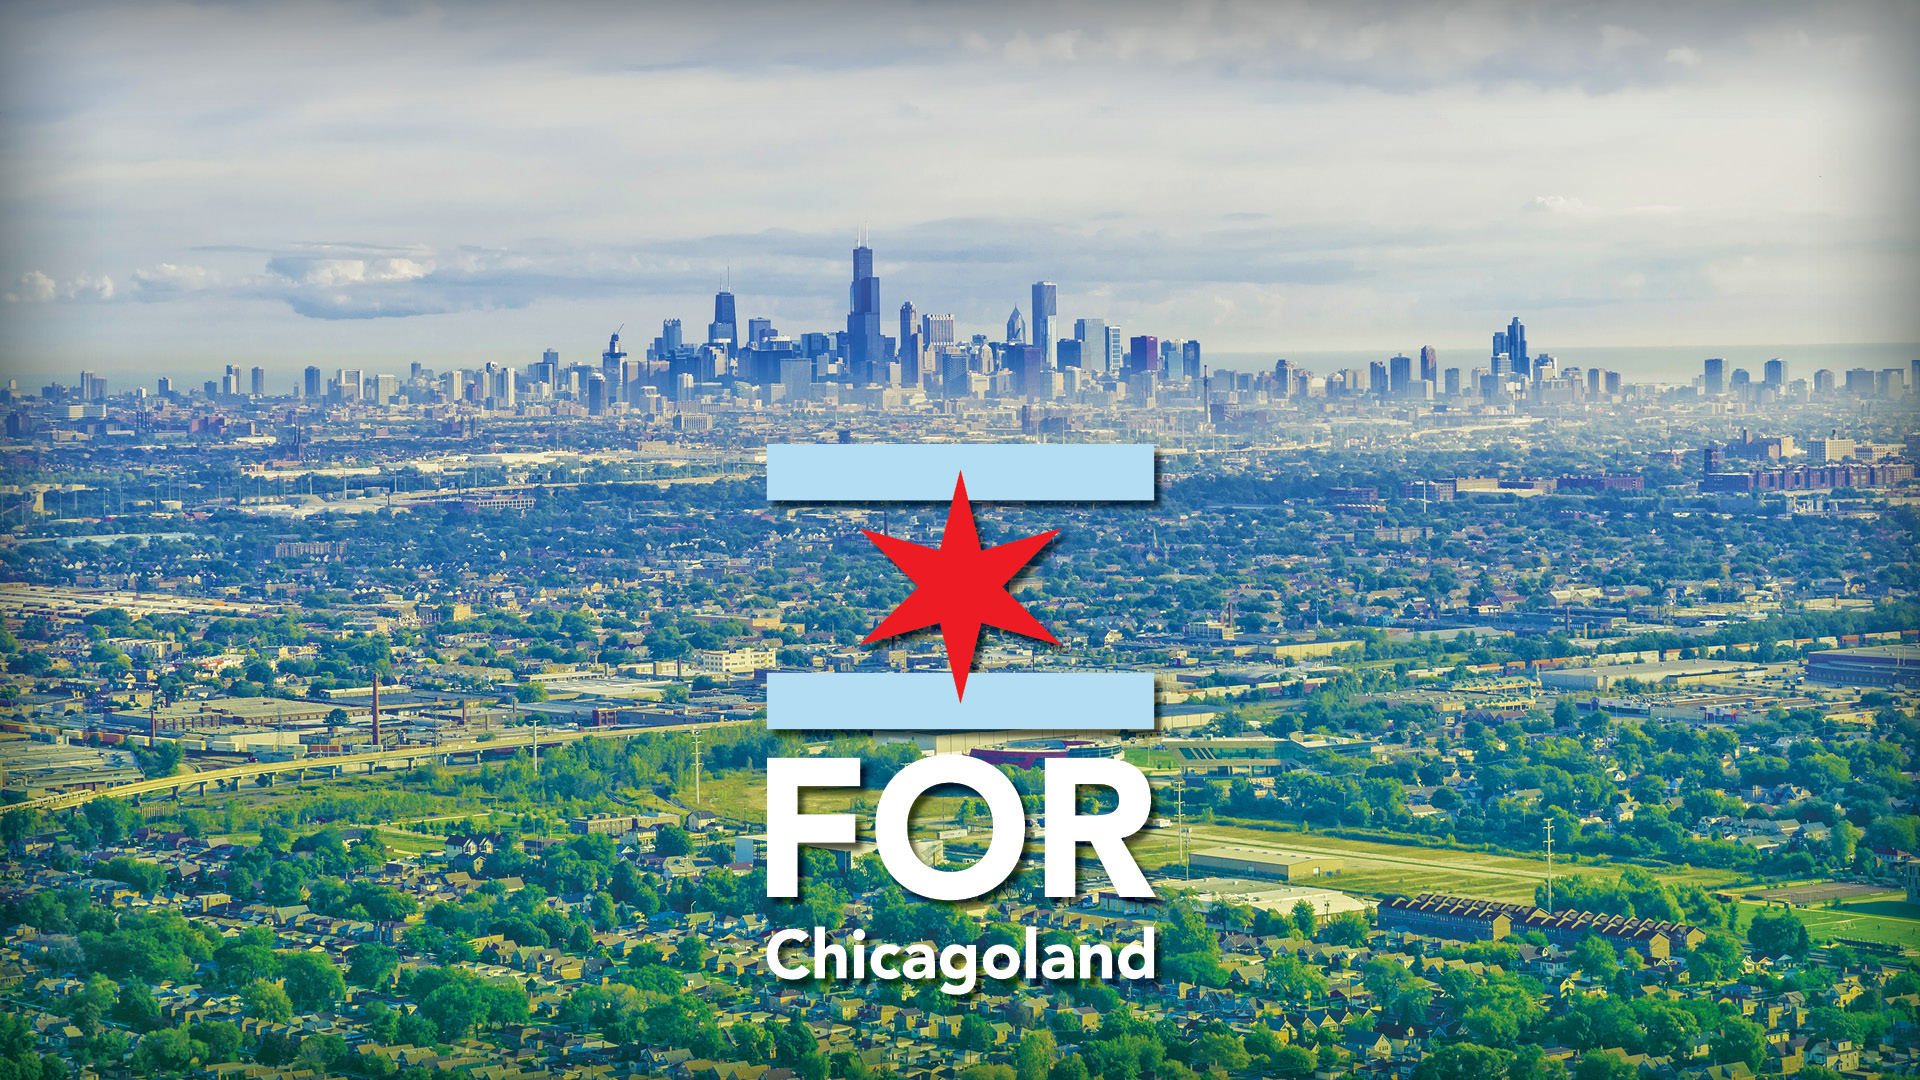 For Chicagoland | First Saturday Serve
Saturday, July 1
 
